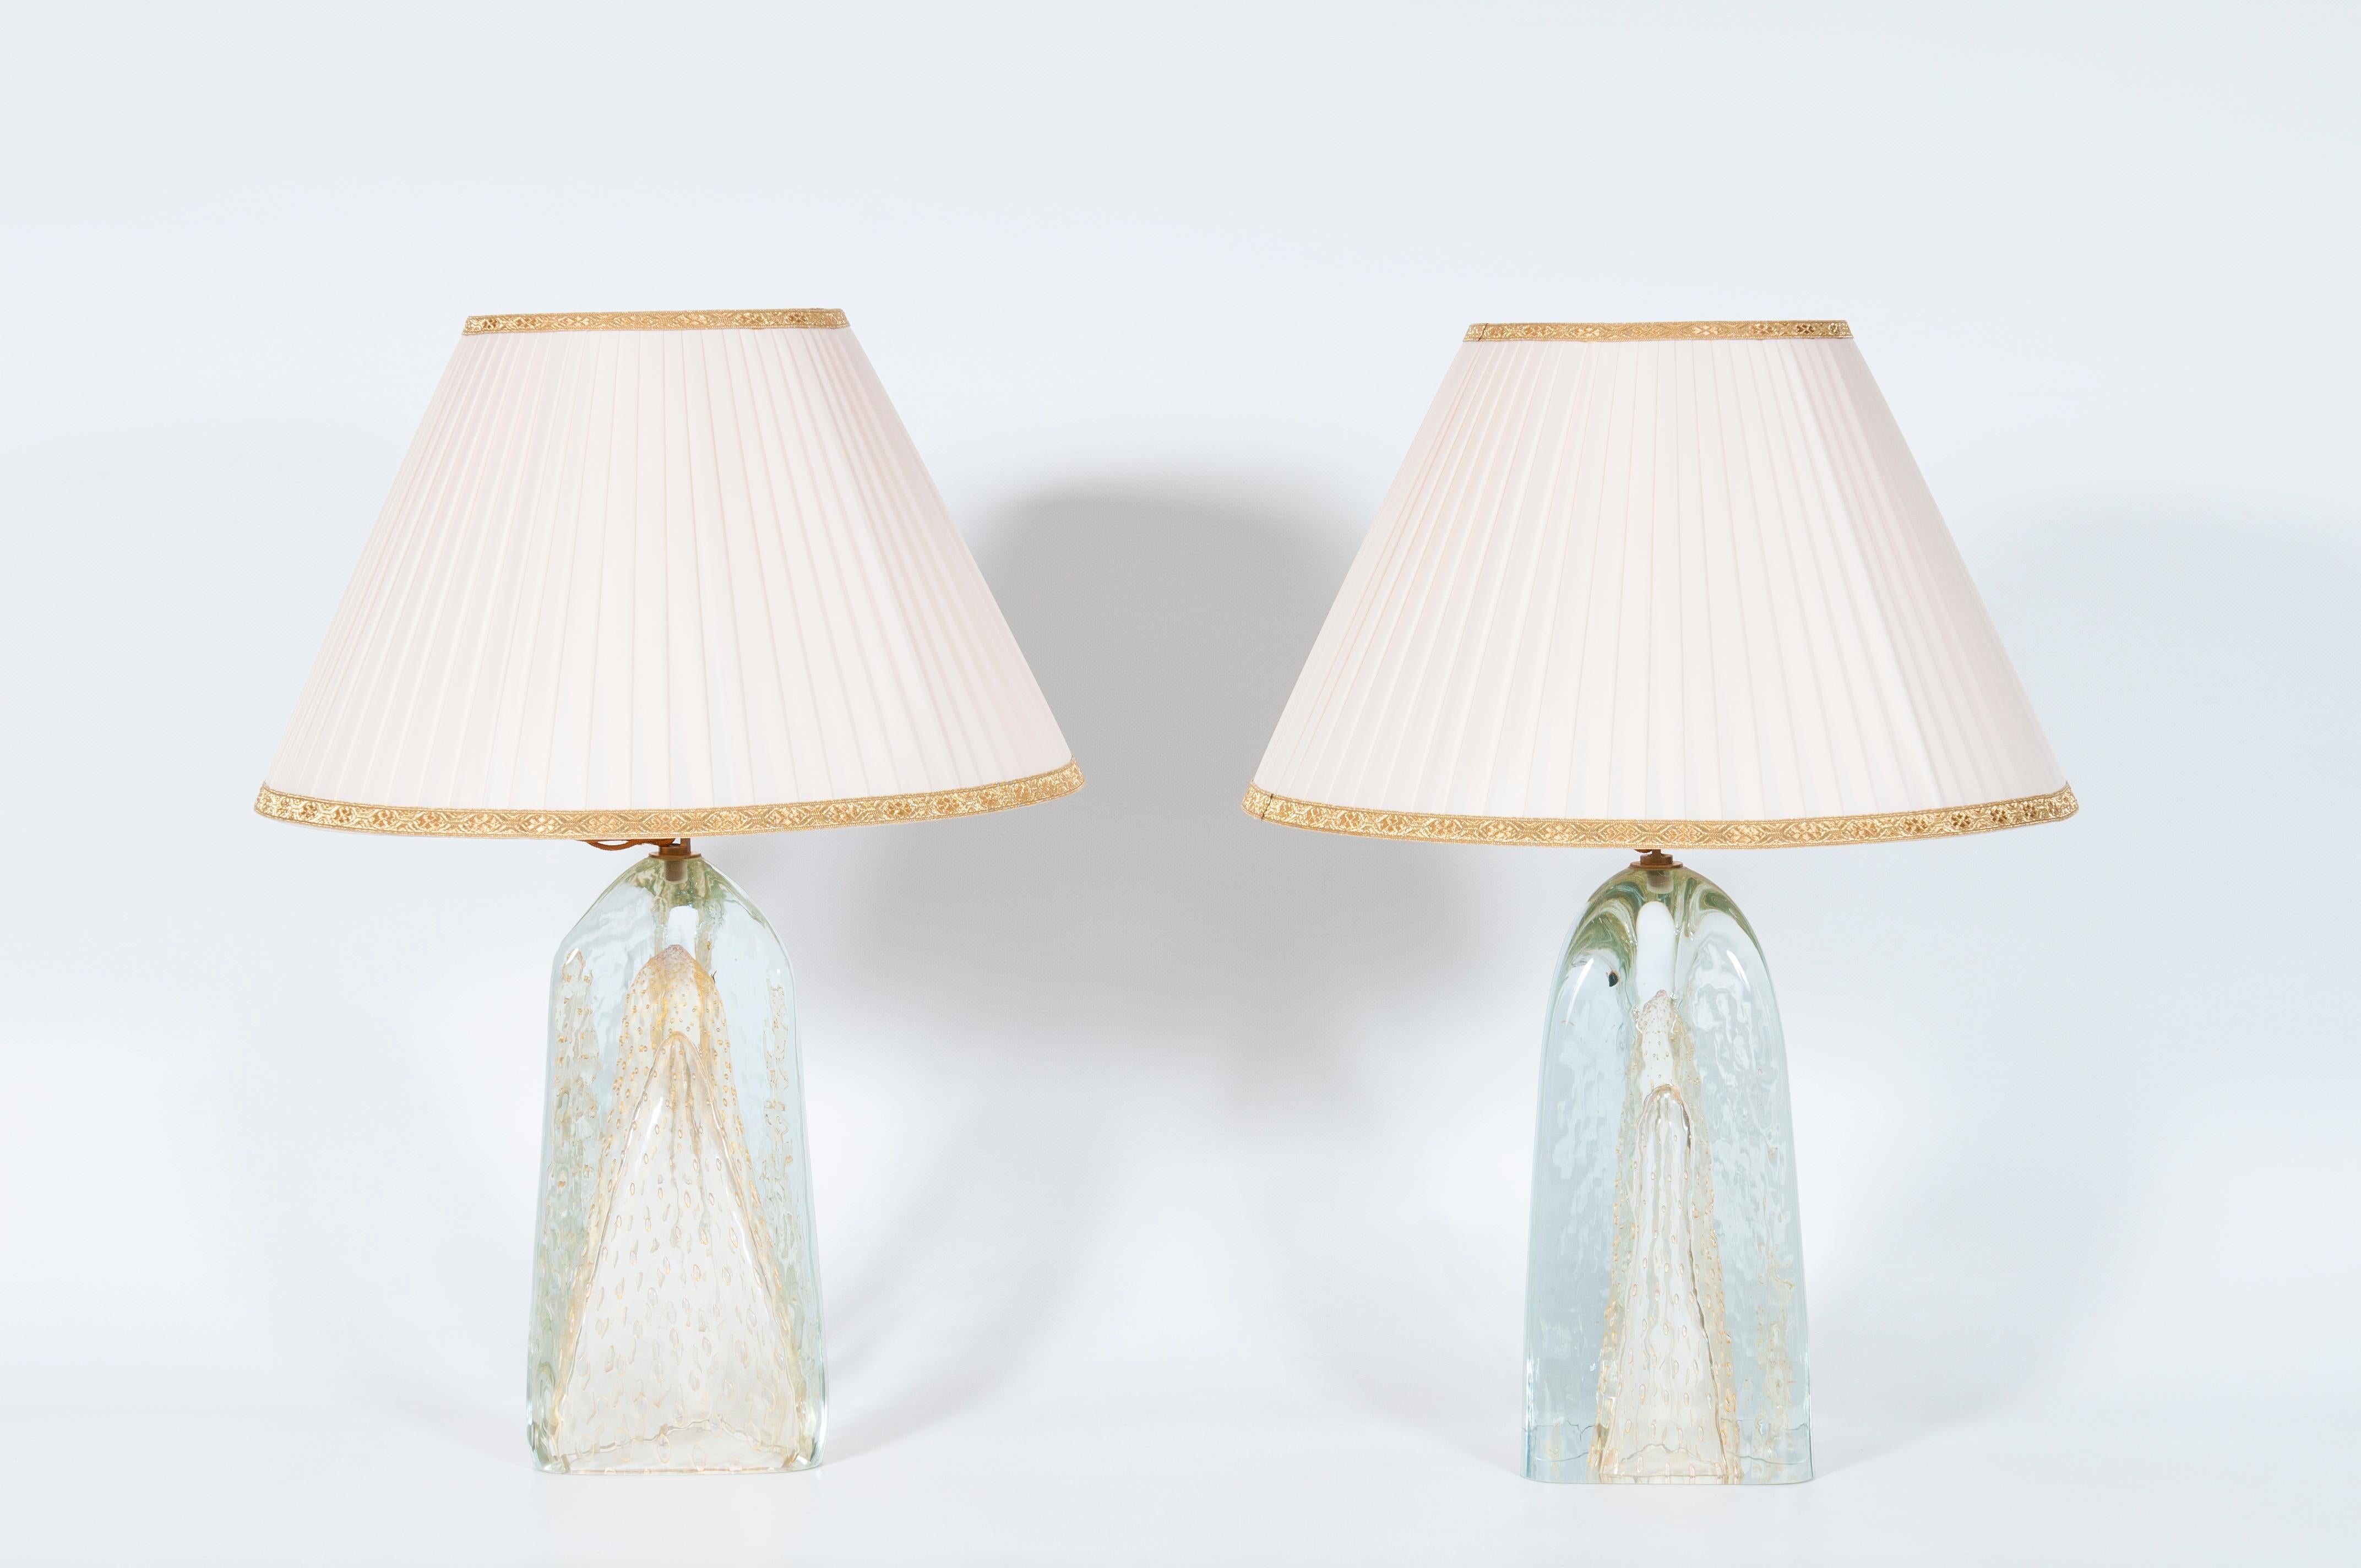 Pair of Murano glass triangle-shaped lamps with 24-Carat Gold, 1980s

This is a truly unique pair of Italian table lamps, entirely handcrafted in the Venetian island of Murano, circa 1980s.
The stem is made of transparent glass with a delicate